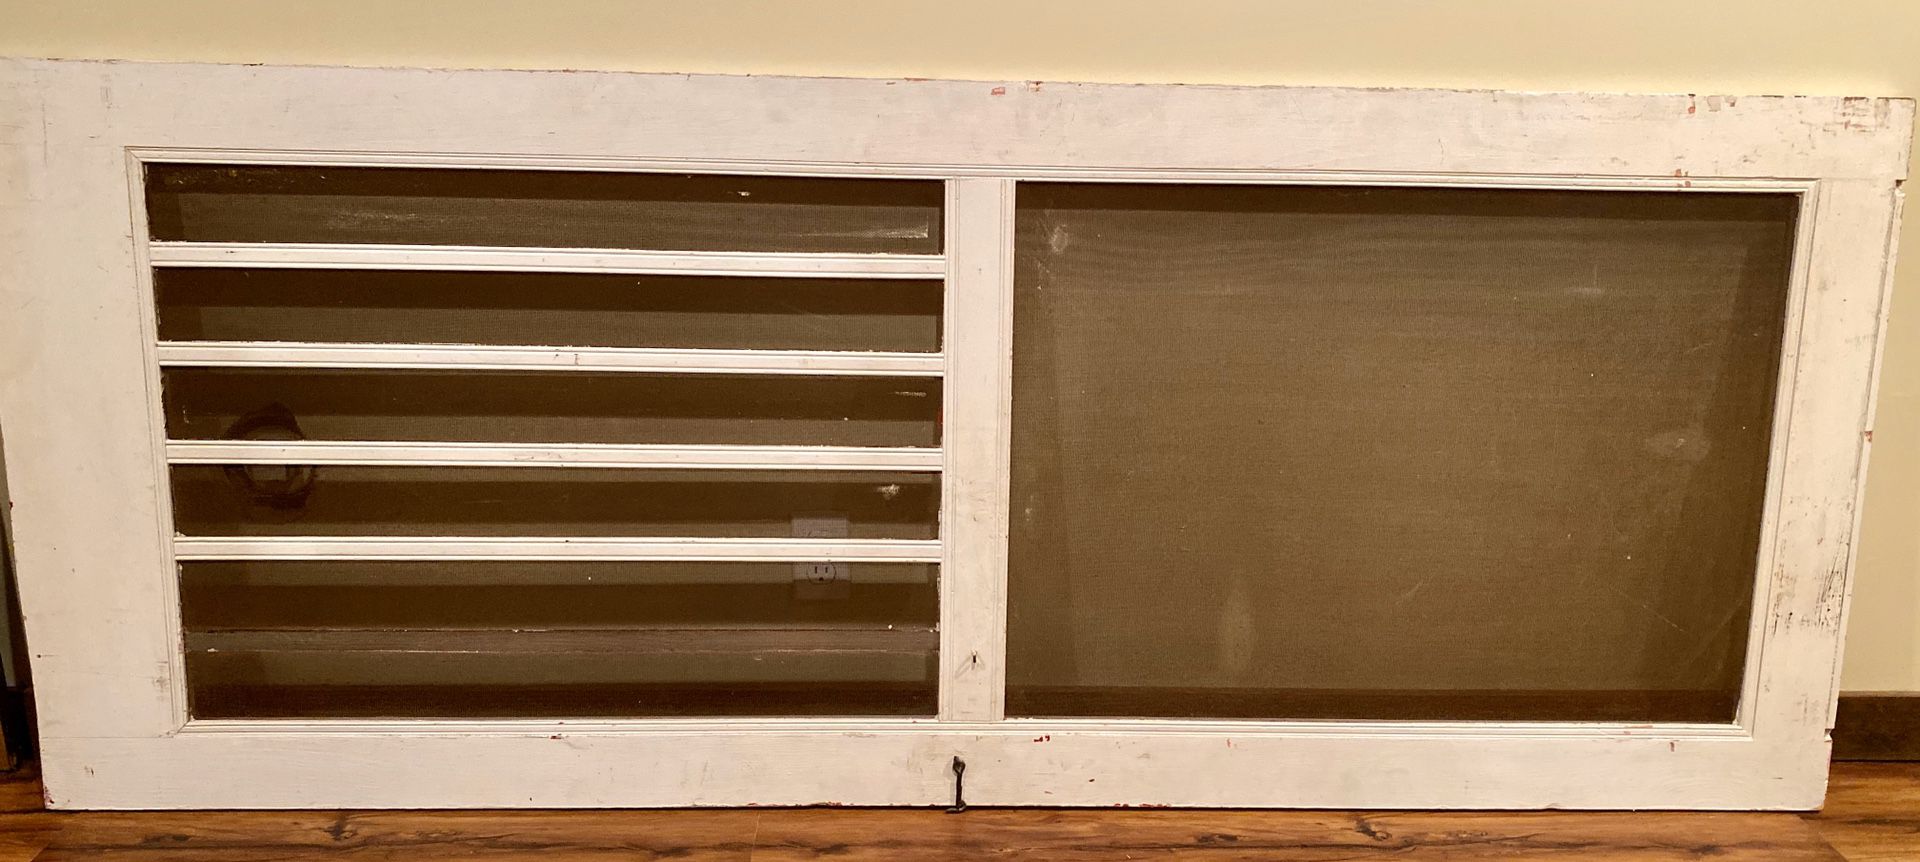 FREE! Antique screen door - perfect for DIY project- FREE